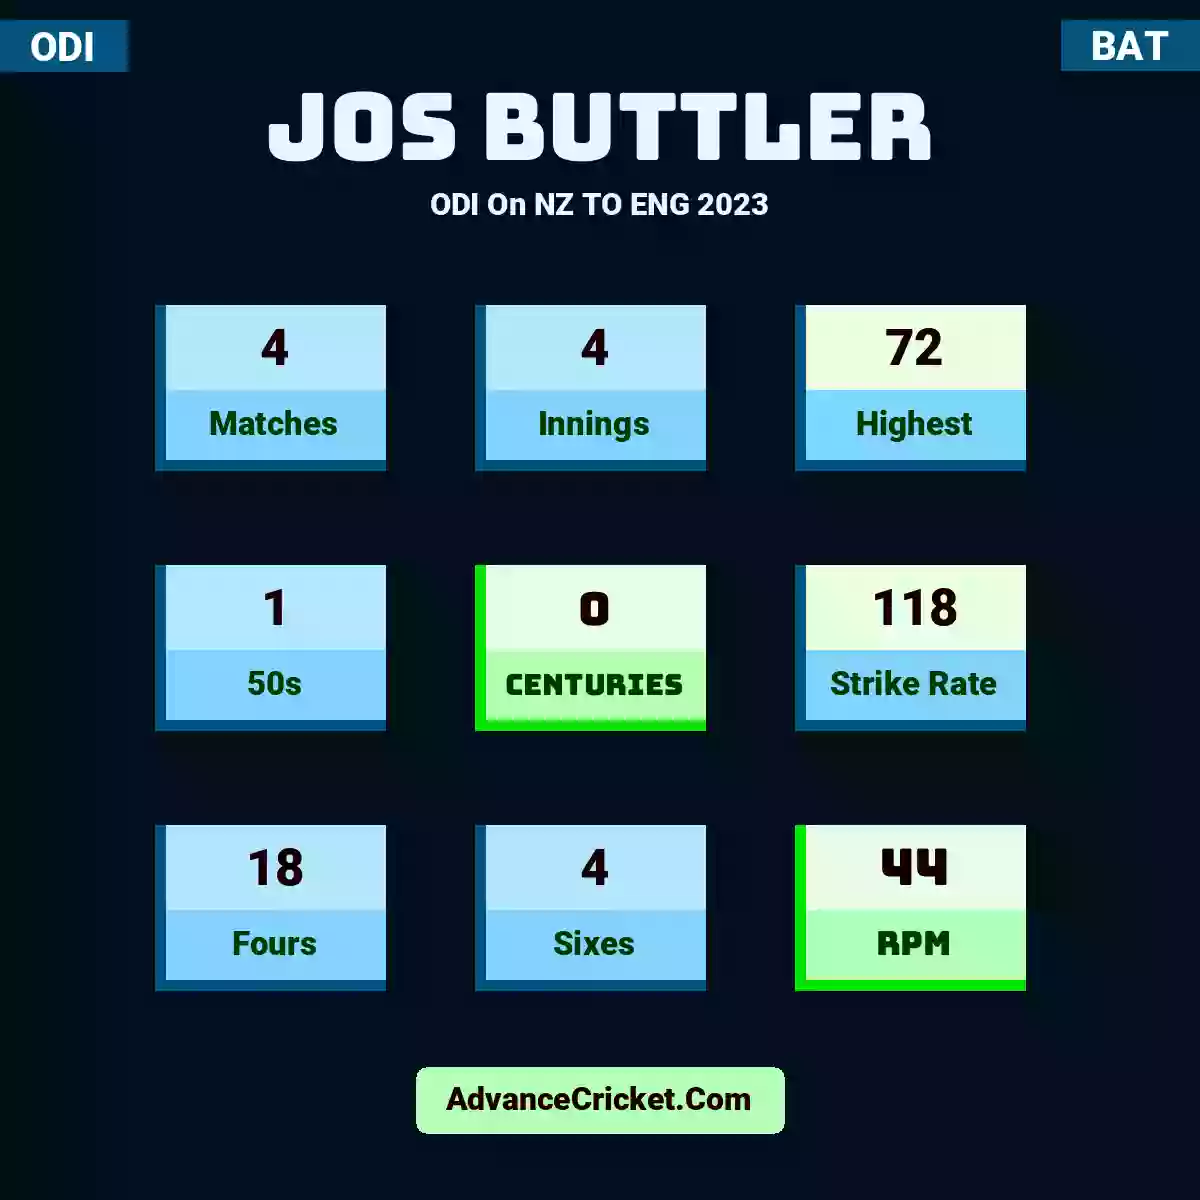 Jos Buttler ODI  On NZ TO ENG 2023, Jos Buttler played 4 matches, scored 72 runs as highest, 1 half-centuries, and 0 centuries, with a strike rate of 118. J.Buttler hit 18 fours and 4 sixes, with an RPM of 44.